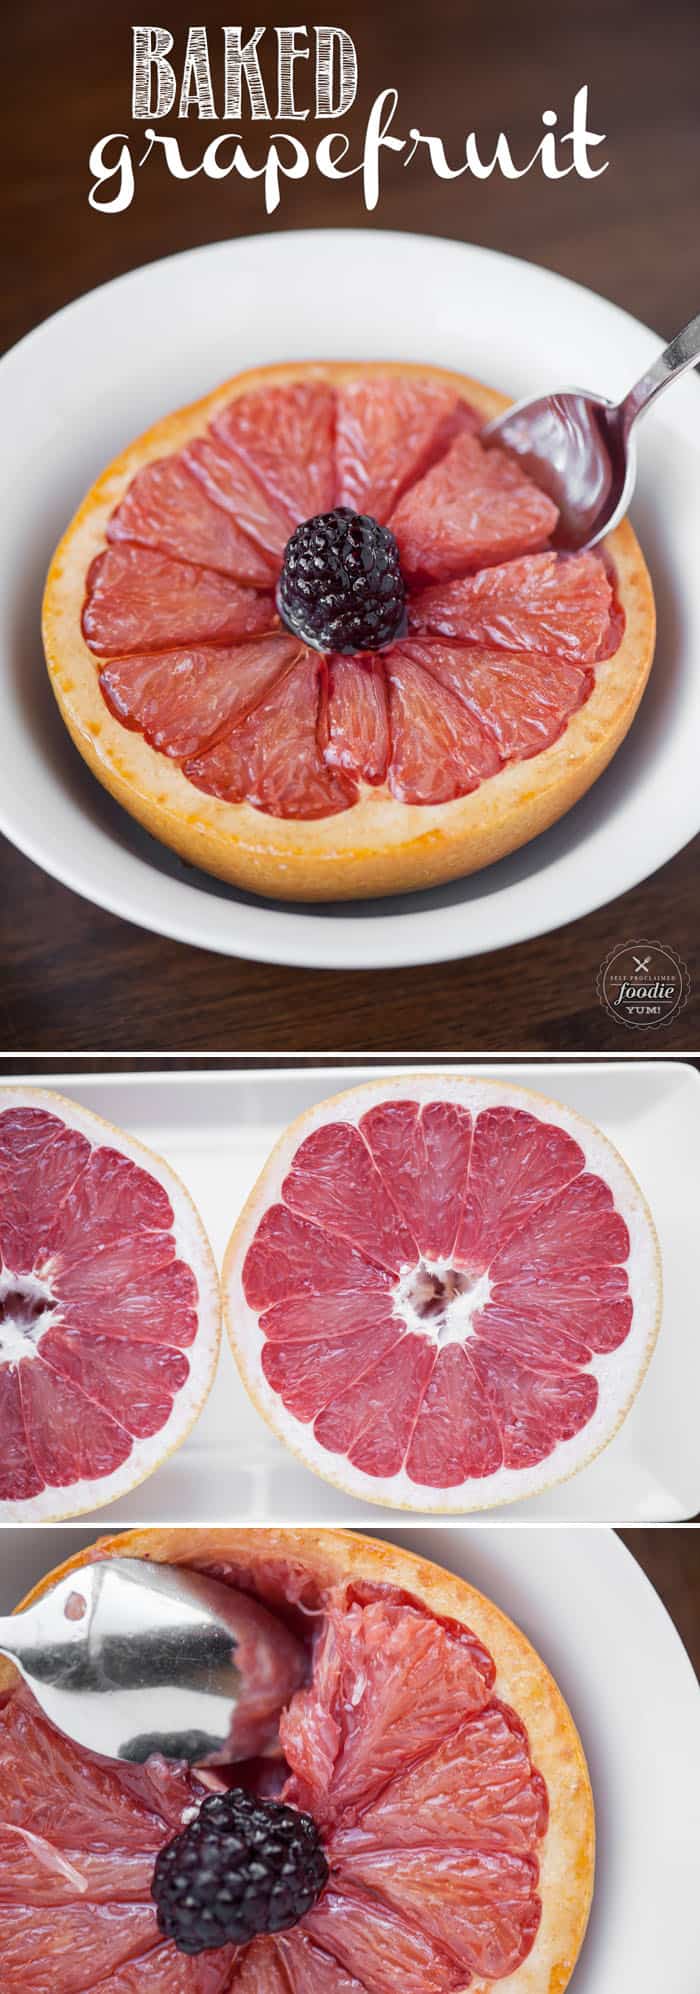 If you’ve never enjoyed Baked Grapefruit, you’re in for a real treat. Follow this simple method and enjoy grapefruit more than you ever thought you could.